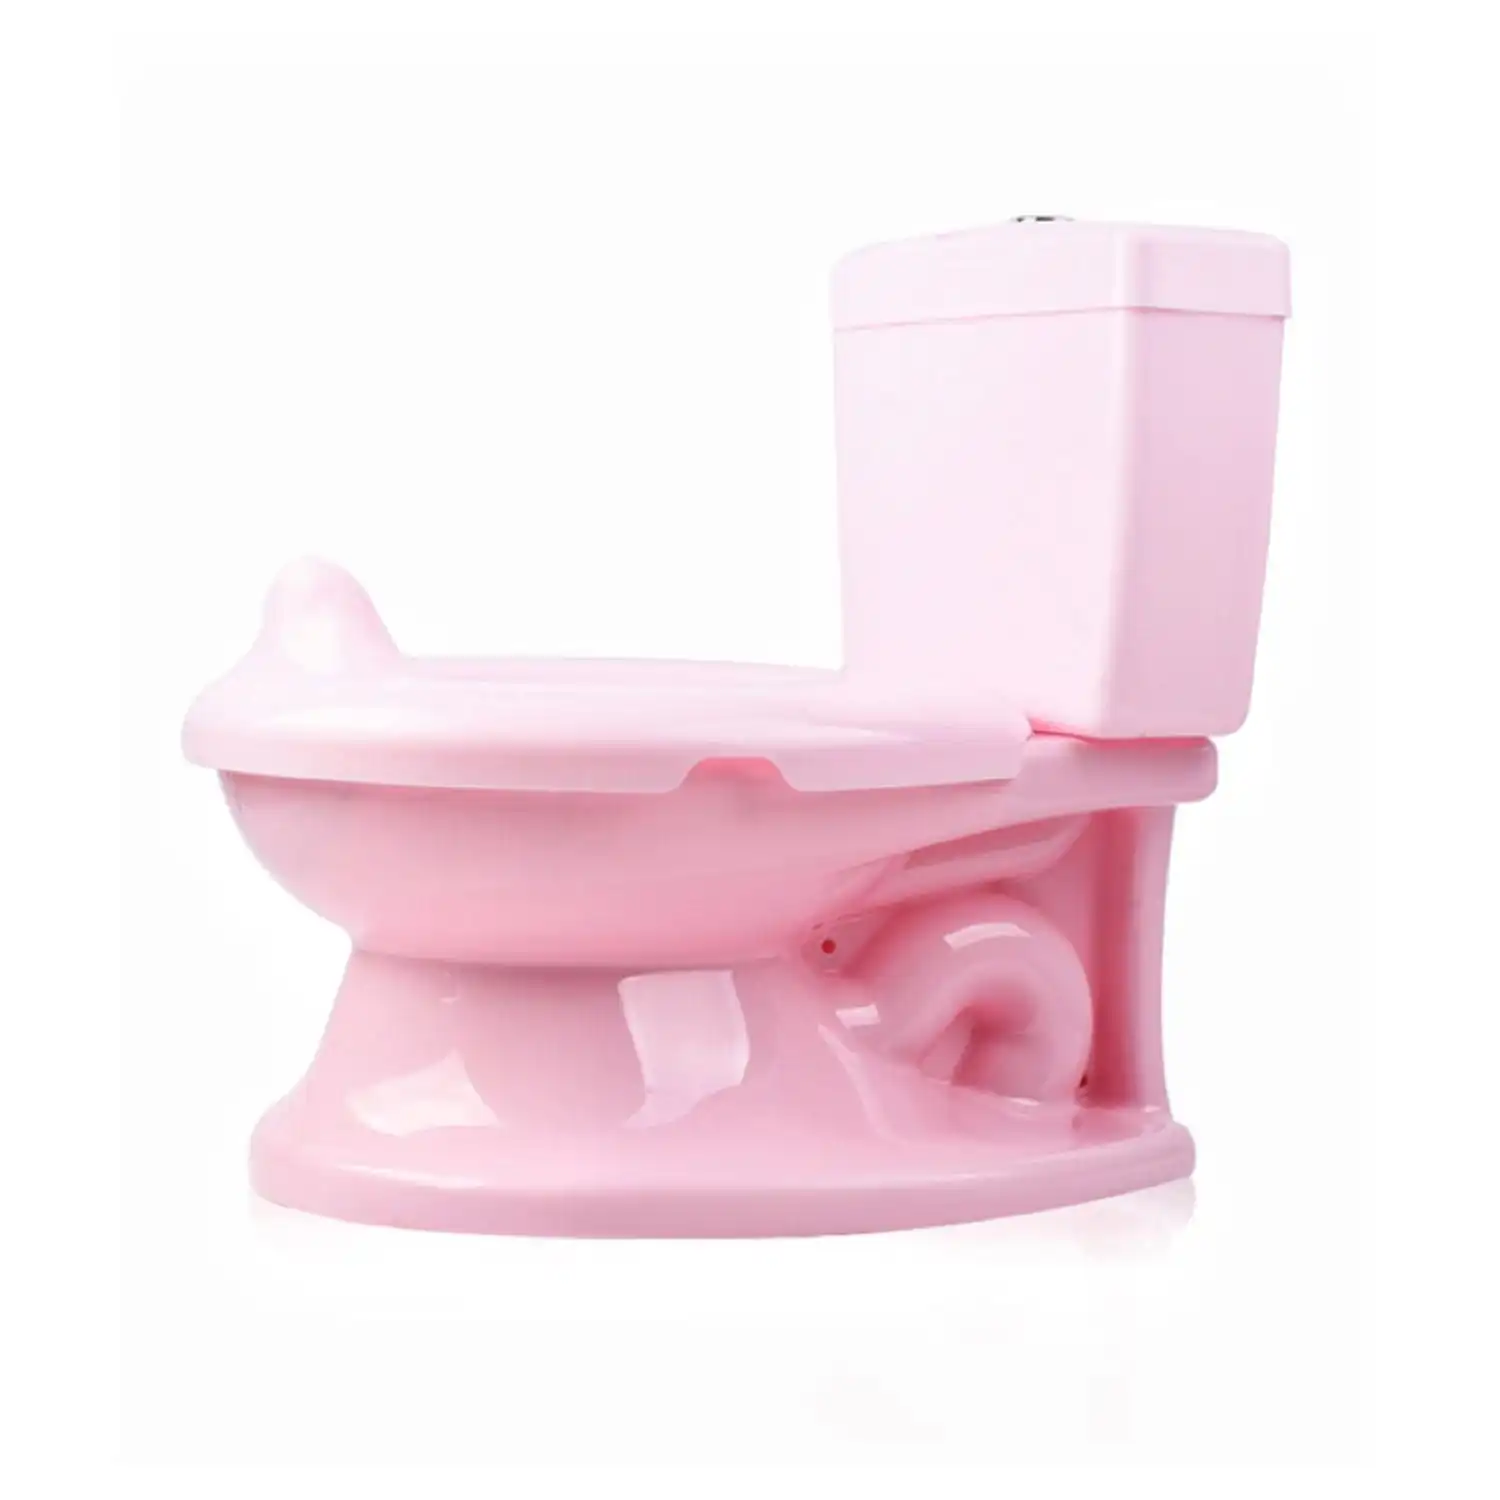 Amirra Children Training Toilet Potty Seat for Baby Kids and Toddlers Pink